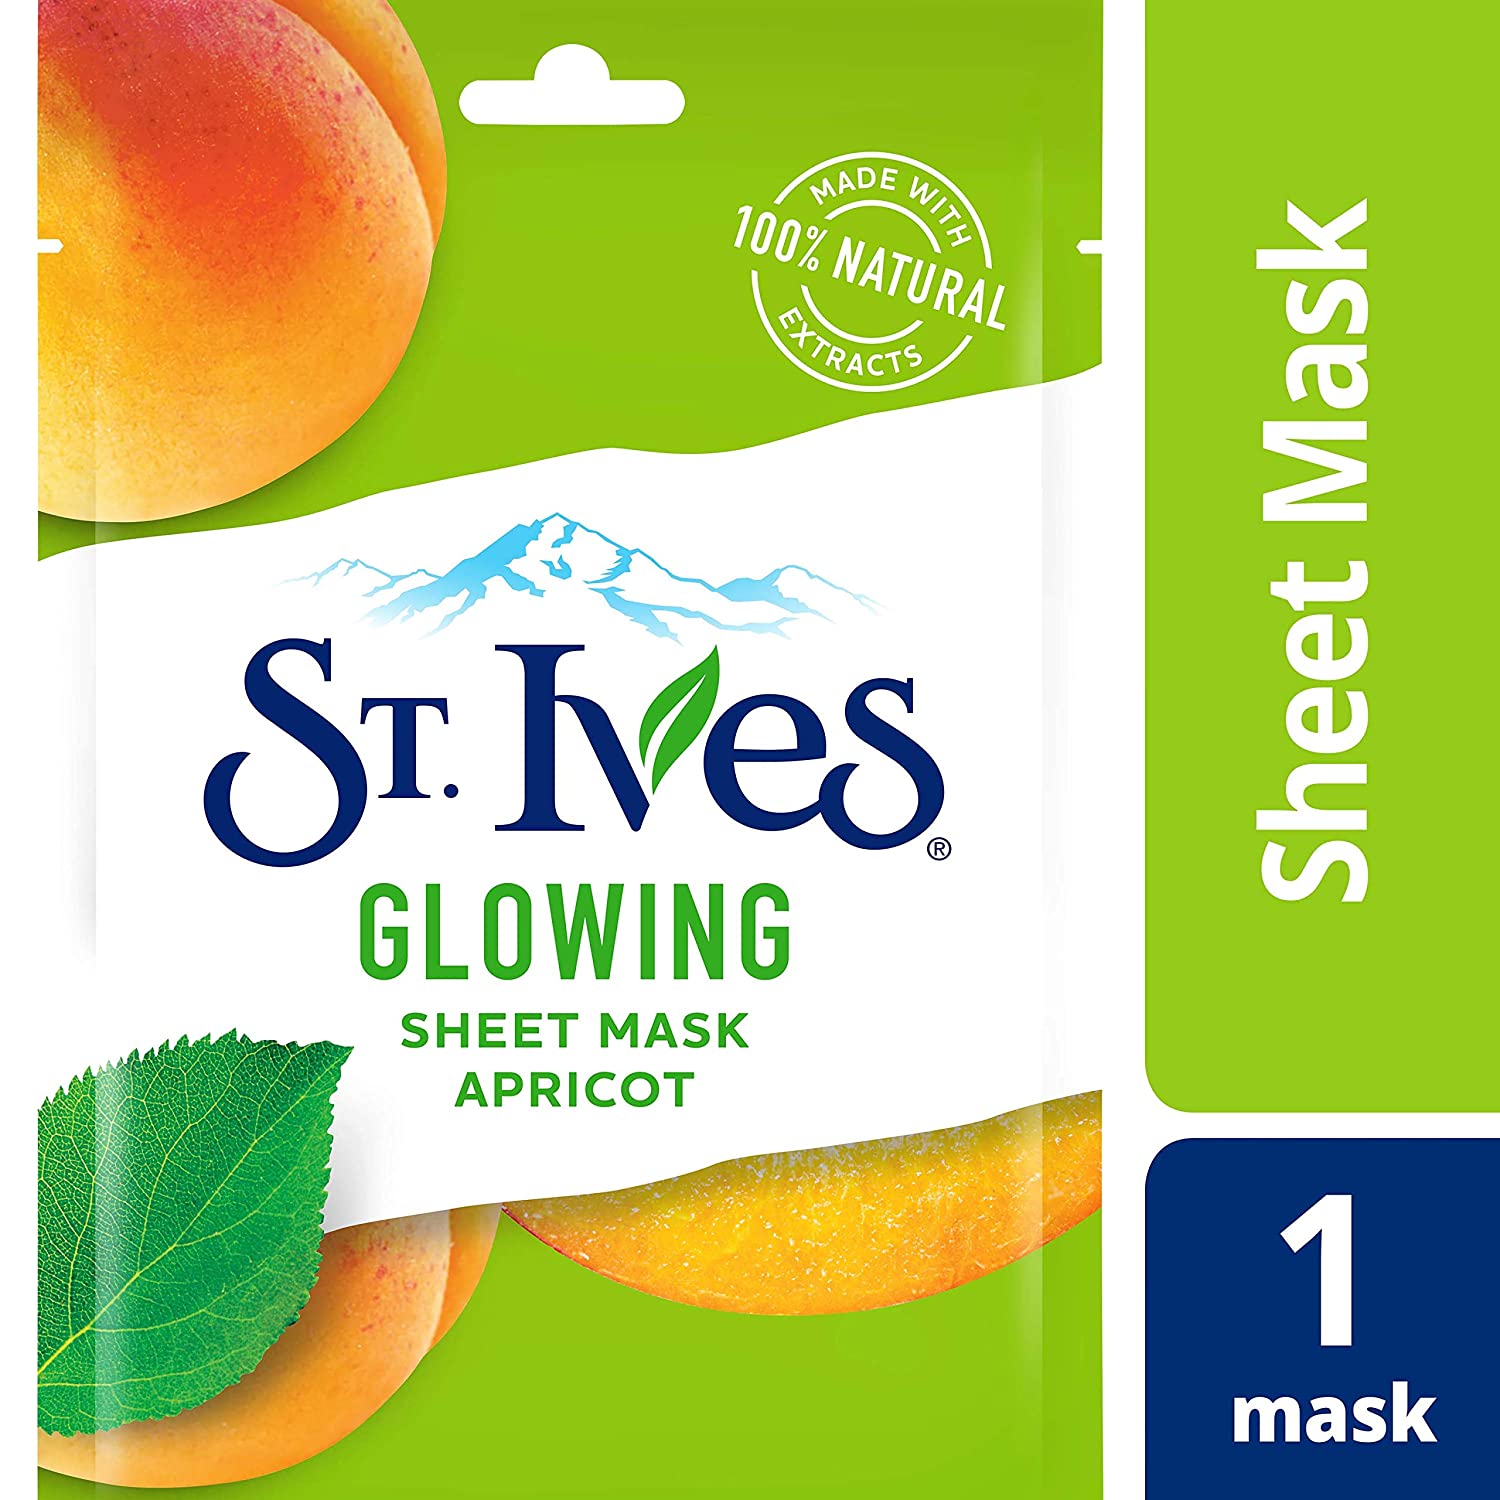 ''St. Ives Skin Care SHEET Mask, Glow Apricot, 6 Count''